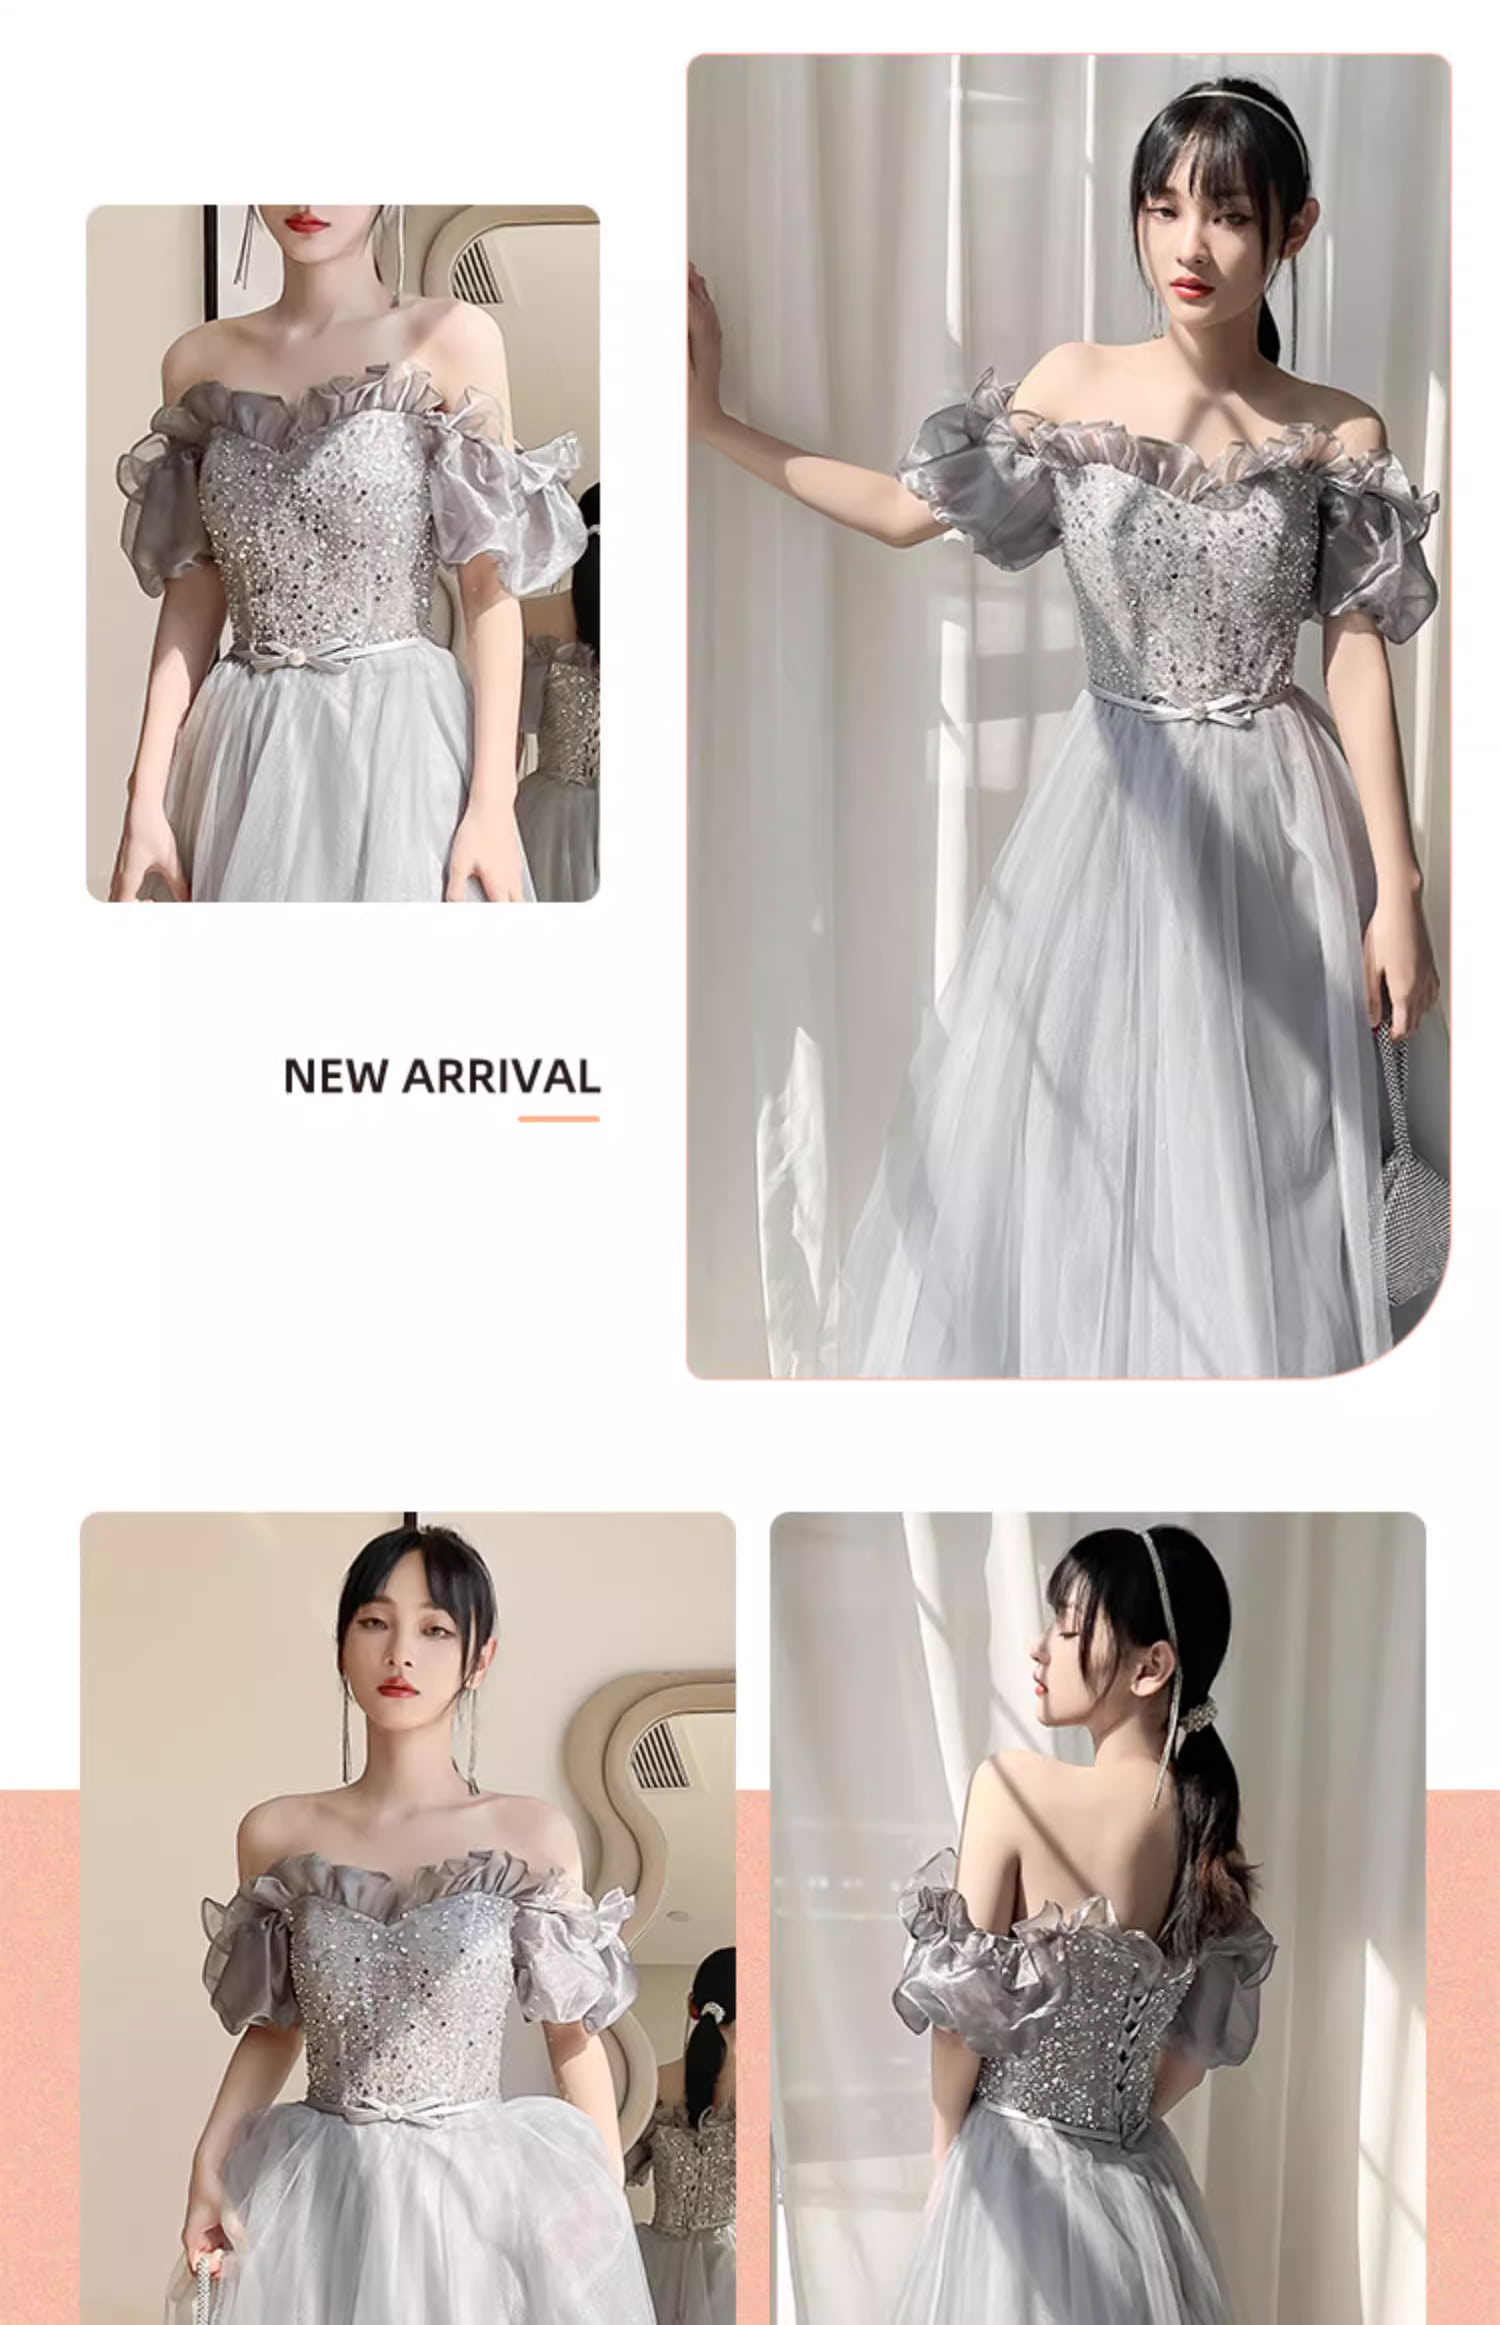 Fashion-A-line-Summer-Grey-Tulle-Evening-Prom-Bridesmaid-Maxi-Dress15